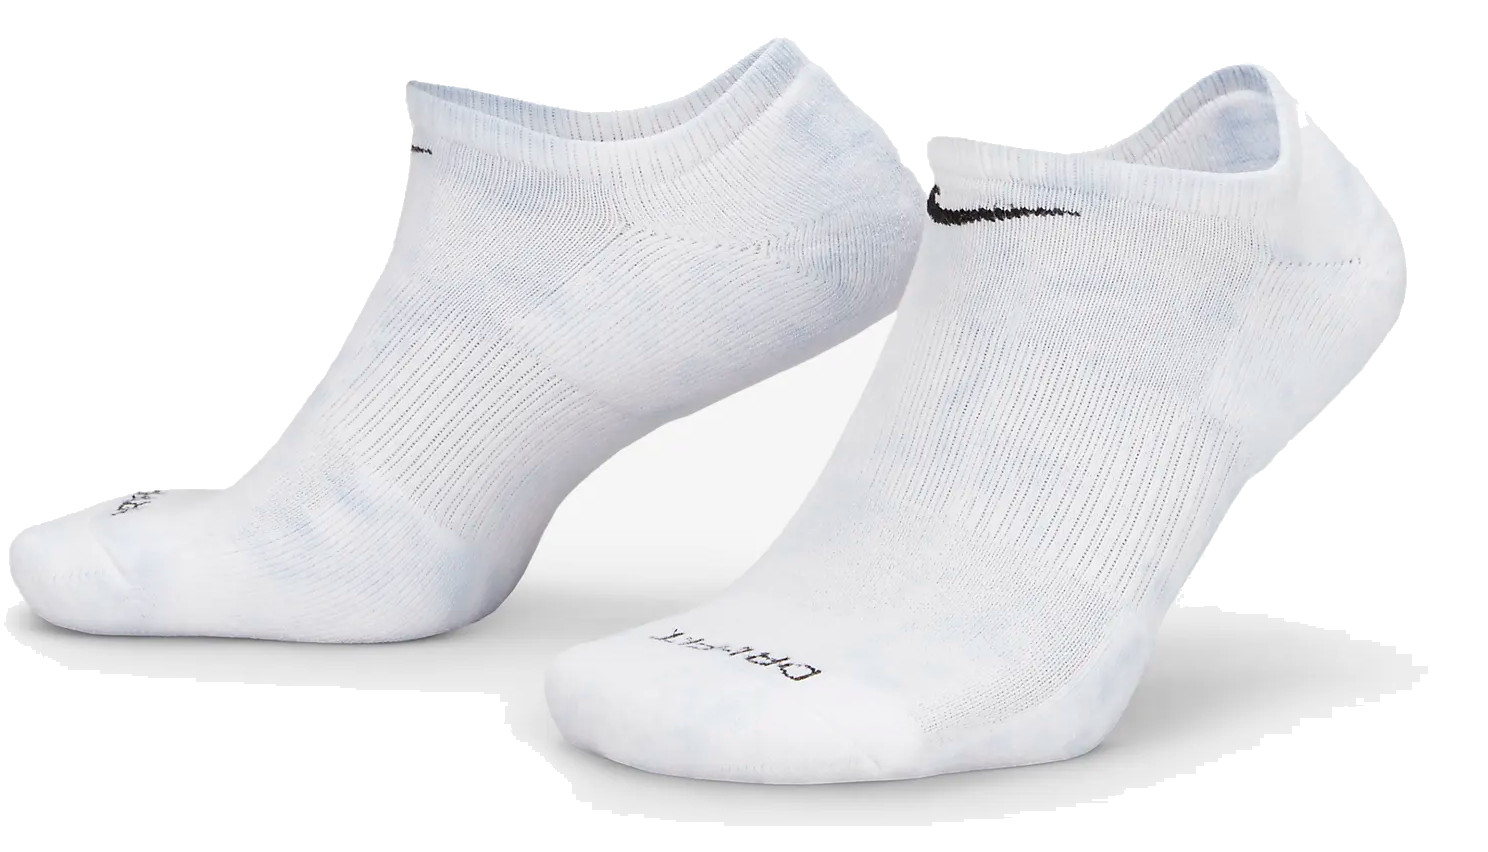 Chaussettes Nike Everyday Plus 3P